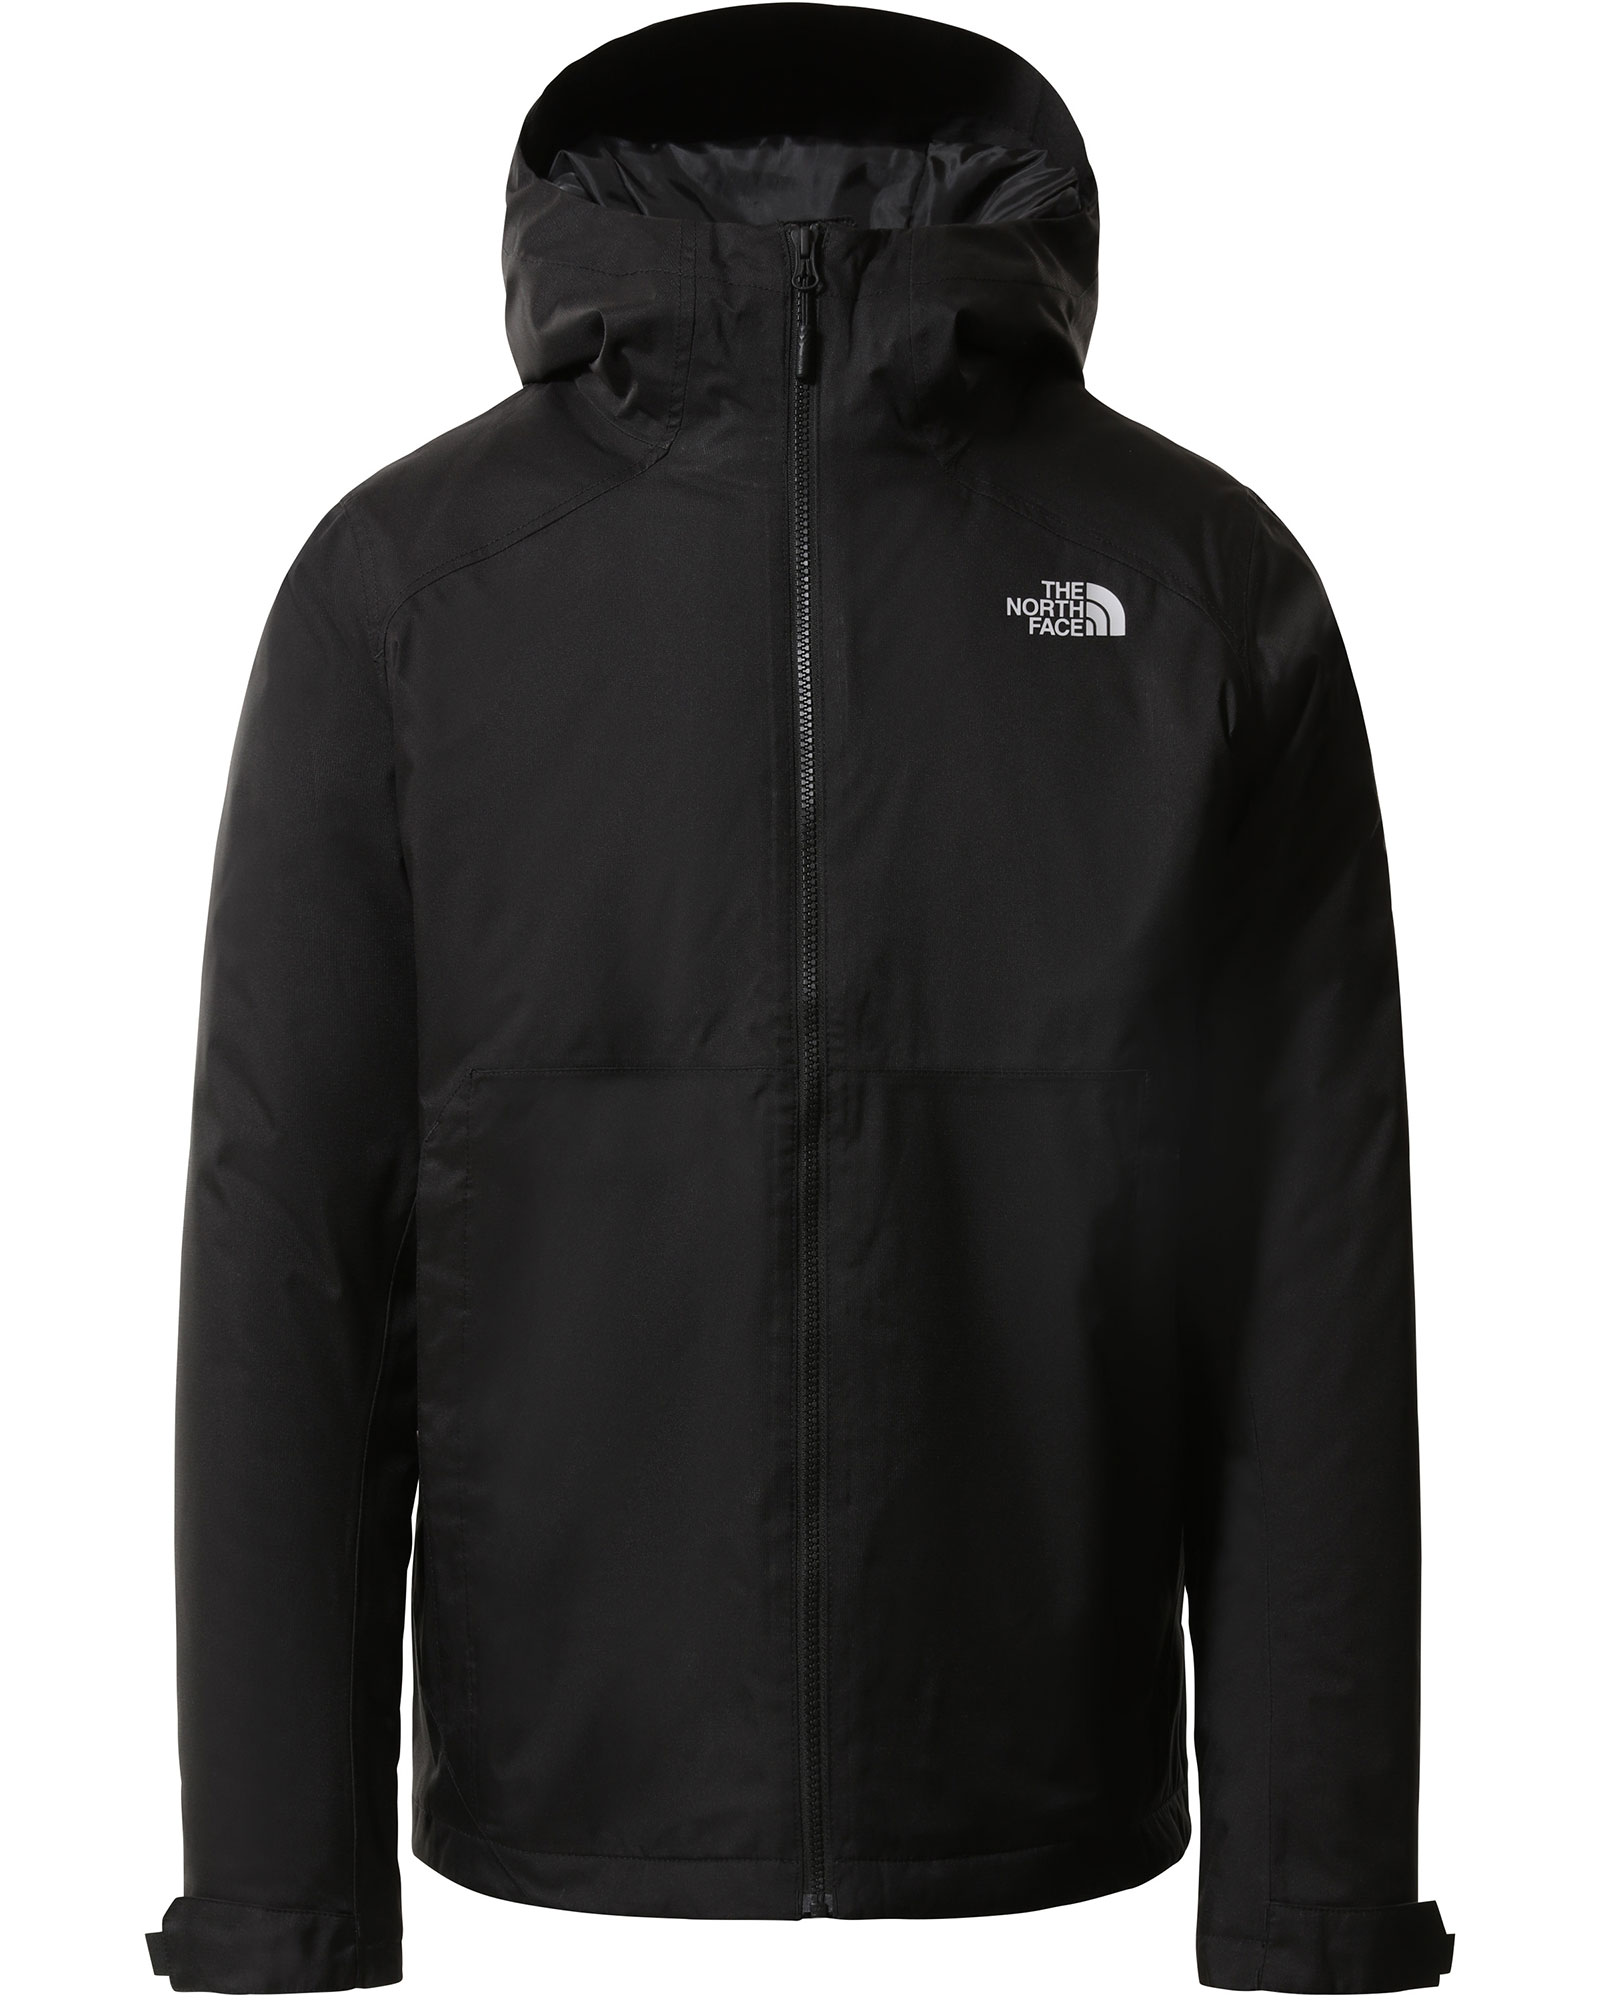 The North Face Millerton DryVent Men’s Insulated Jacket - TNF Black S